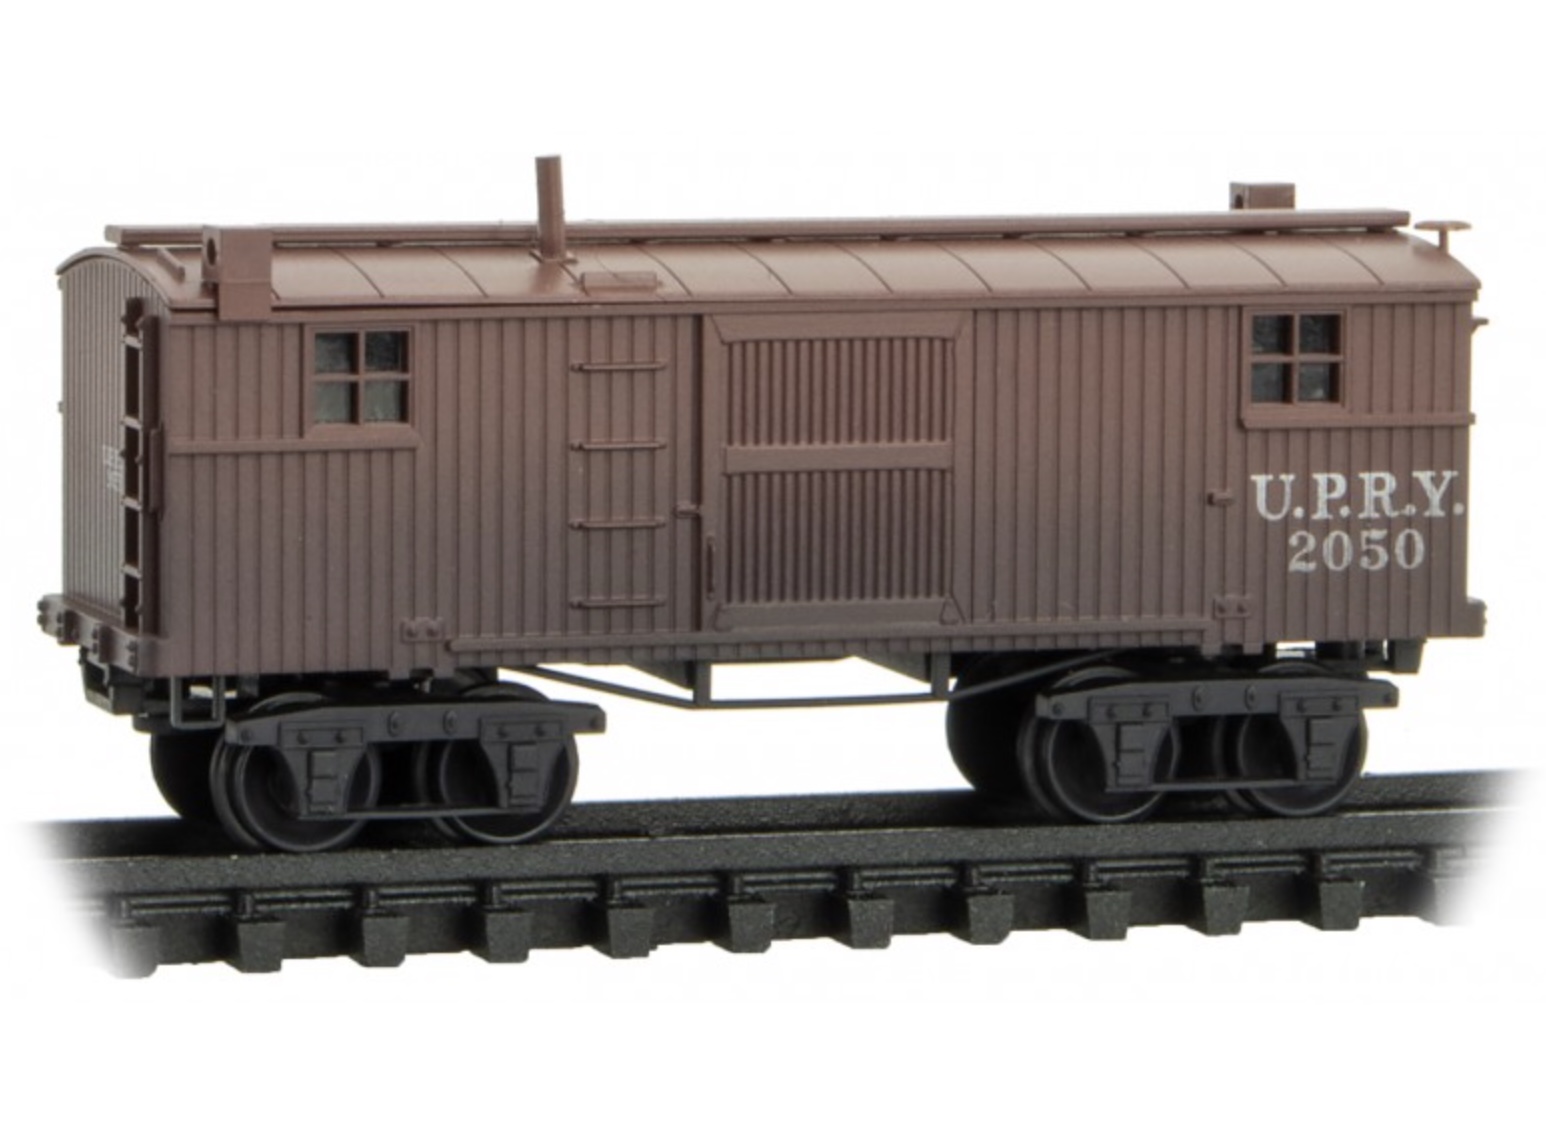 N Scale - Micro-Trains - 152 53 081 - Caboose, 26 Foot, Truss Rod - Union Pacific - 2050